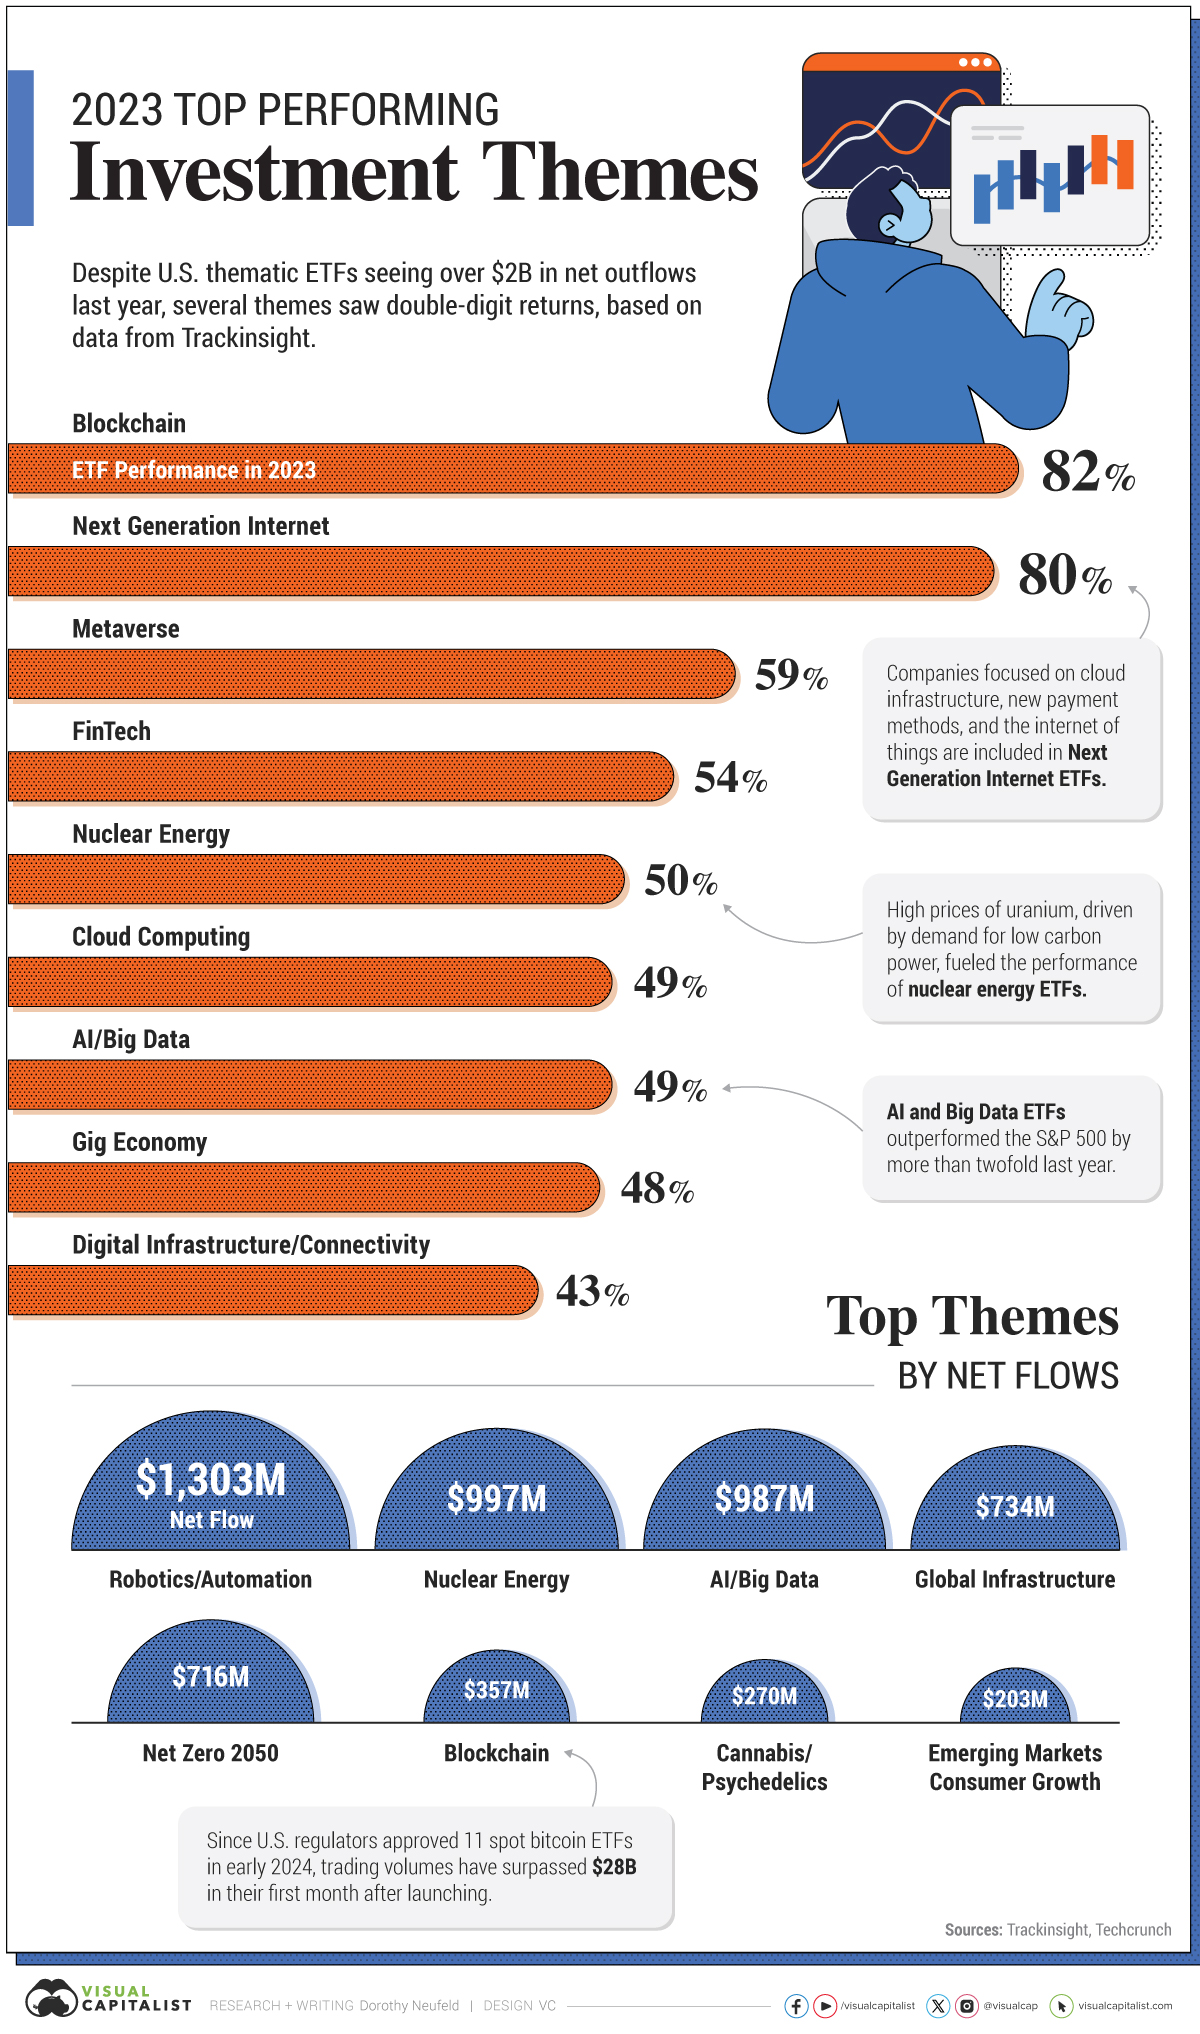 This bar graphic shows the top performing investment themes in 2023.